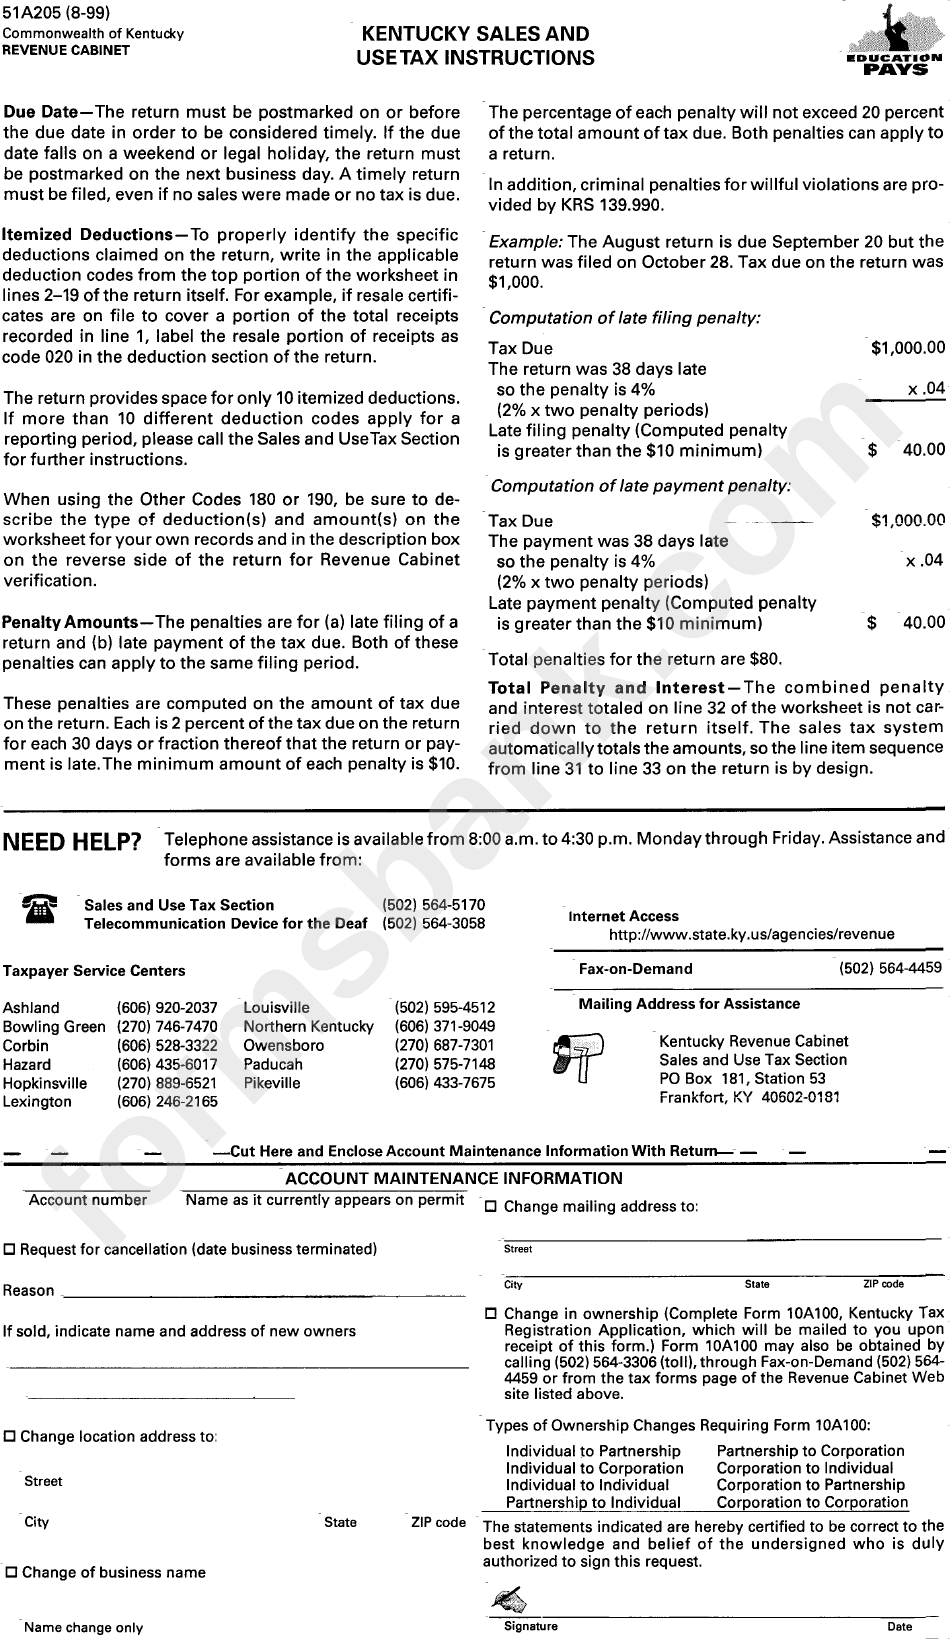 form-51a205-account-maintenance-information-for-kentucky-sales-and